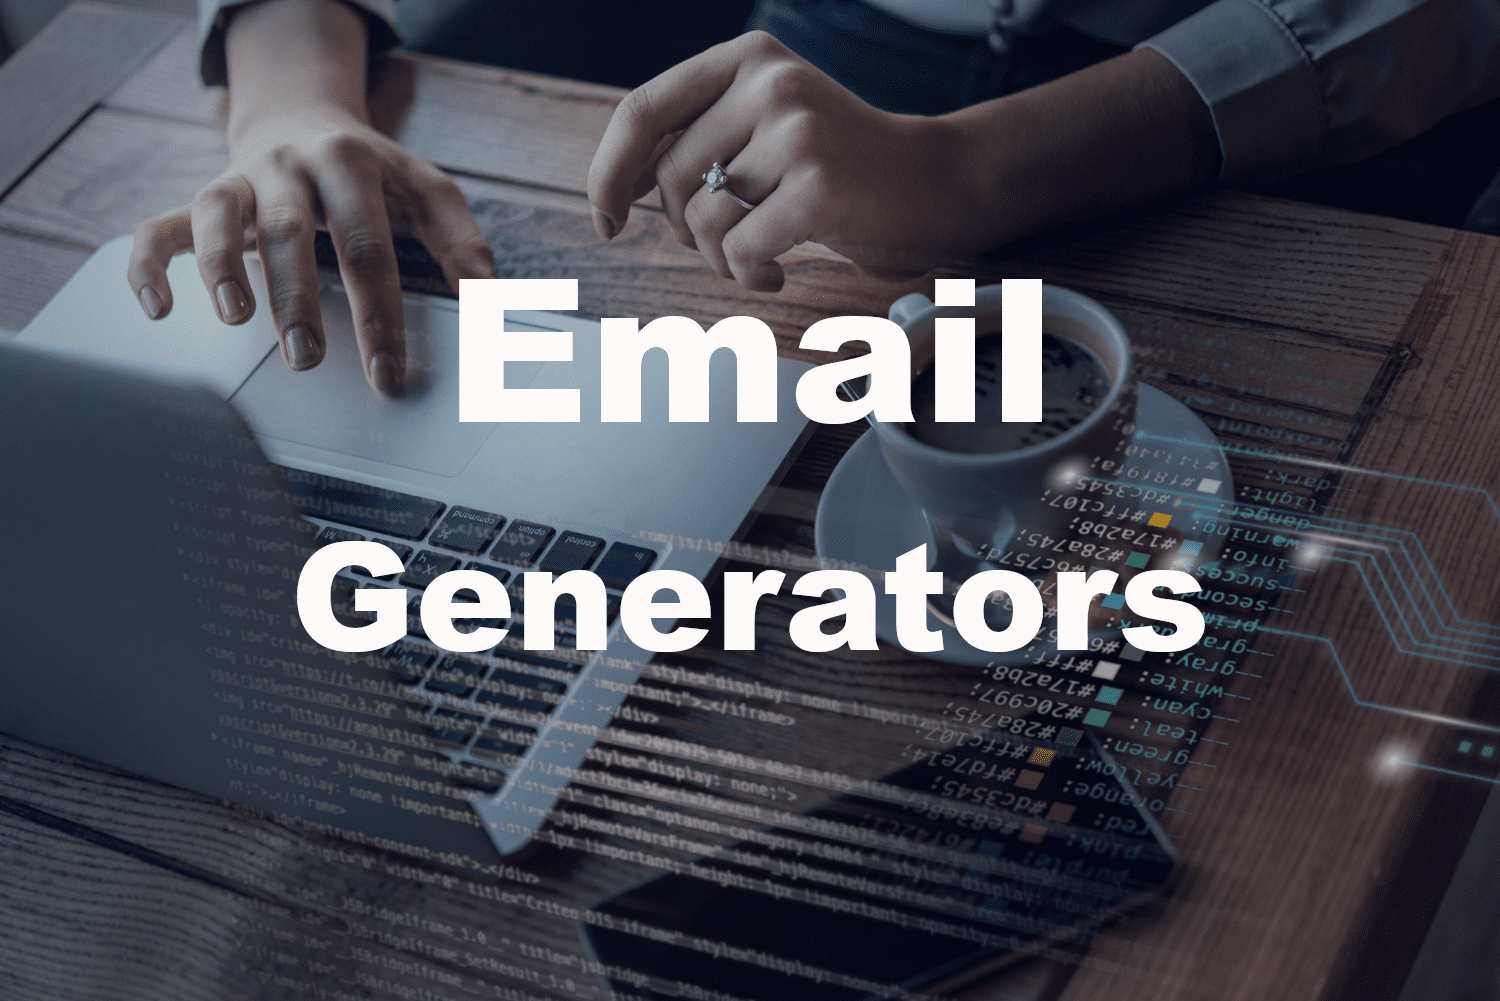 Evolution of Email Generators to AI-Powered Writing